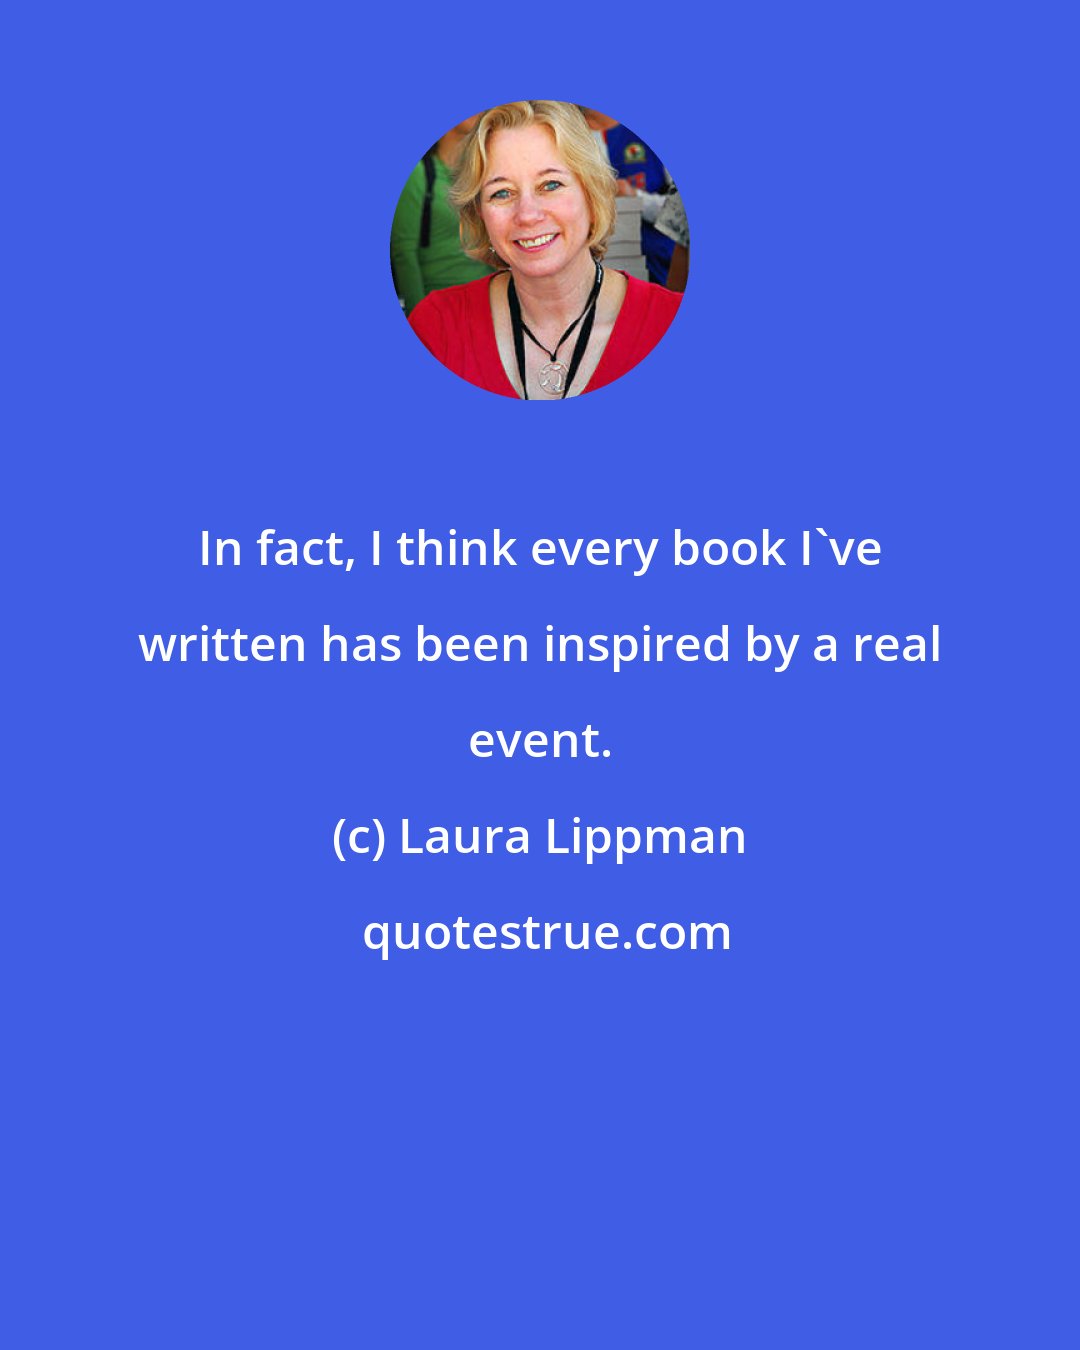 Laura Lippman: In fact, I think every book I've written has been inspired by a real event.